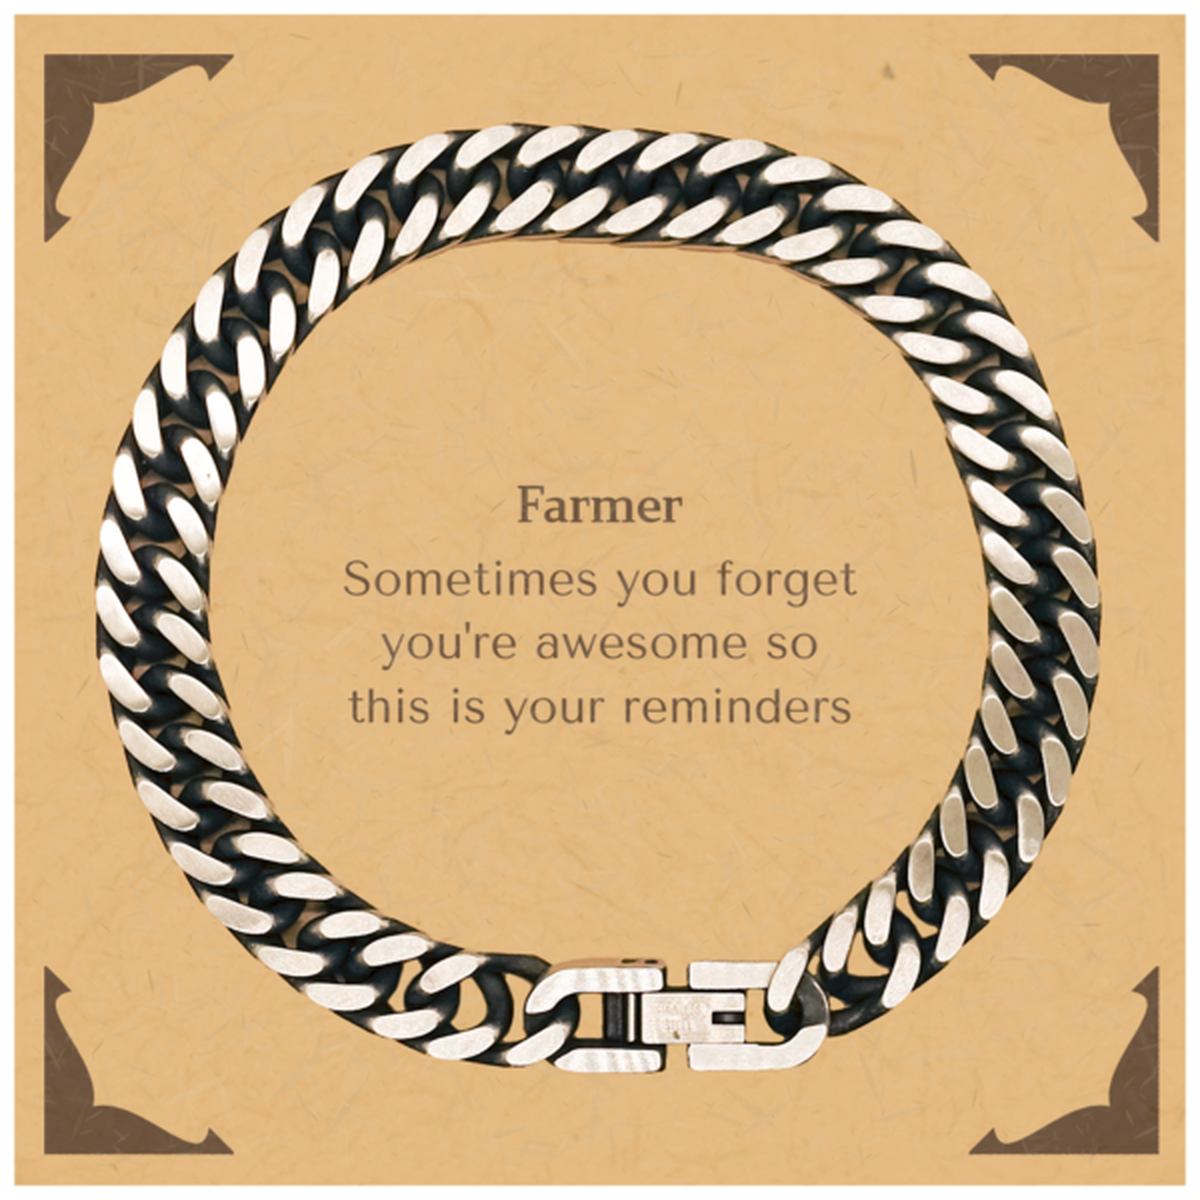 Sentimental Farmer Cuban Link Chain Bracelet, Farmer Sometimes you forget you're awesome so this is your reminders, Graduation Christmas Birthday Gifts for Farmer, Men, Women, Coworkers